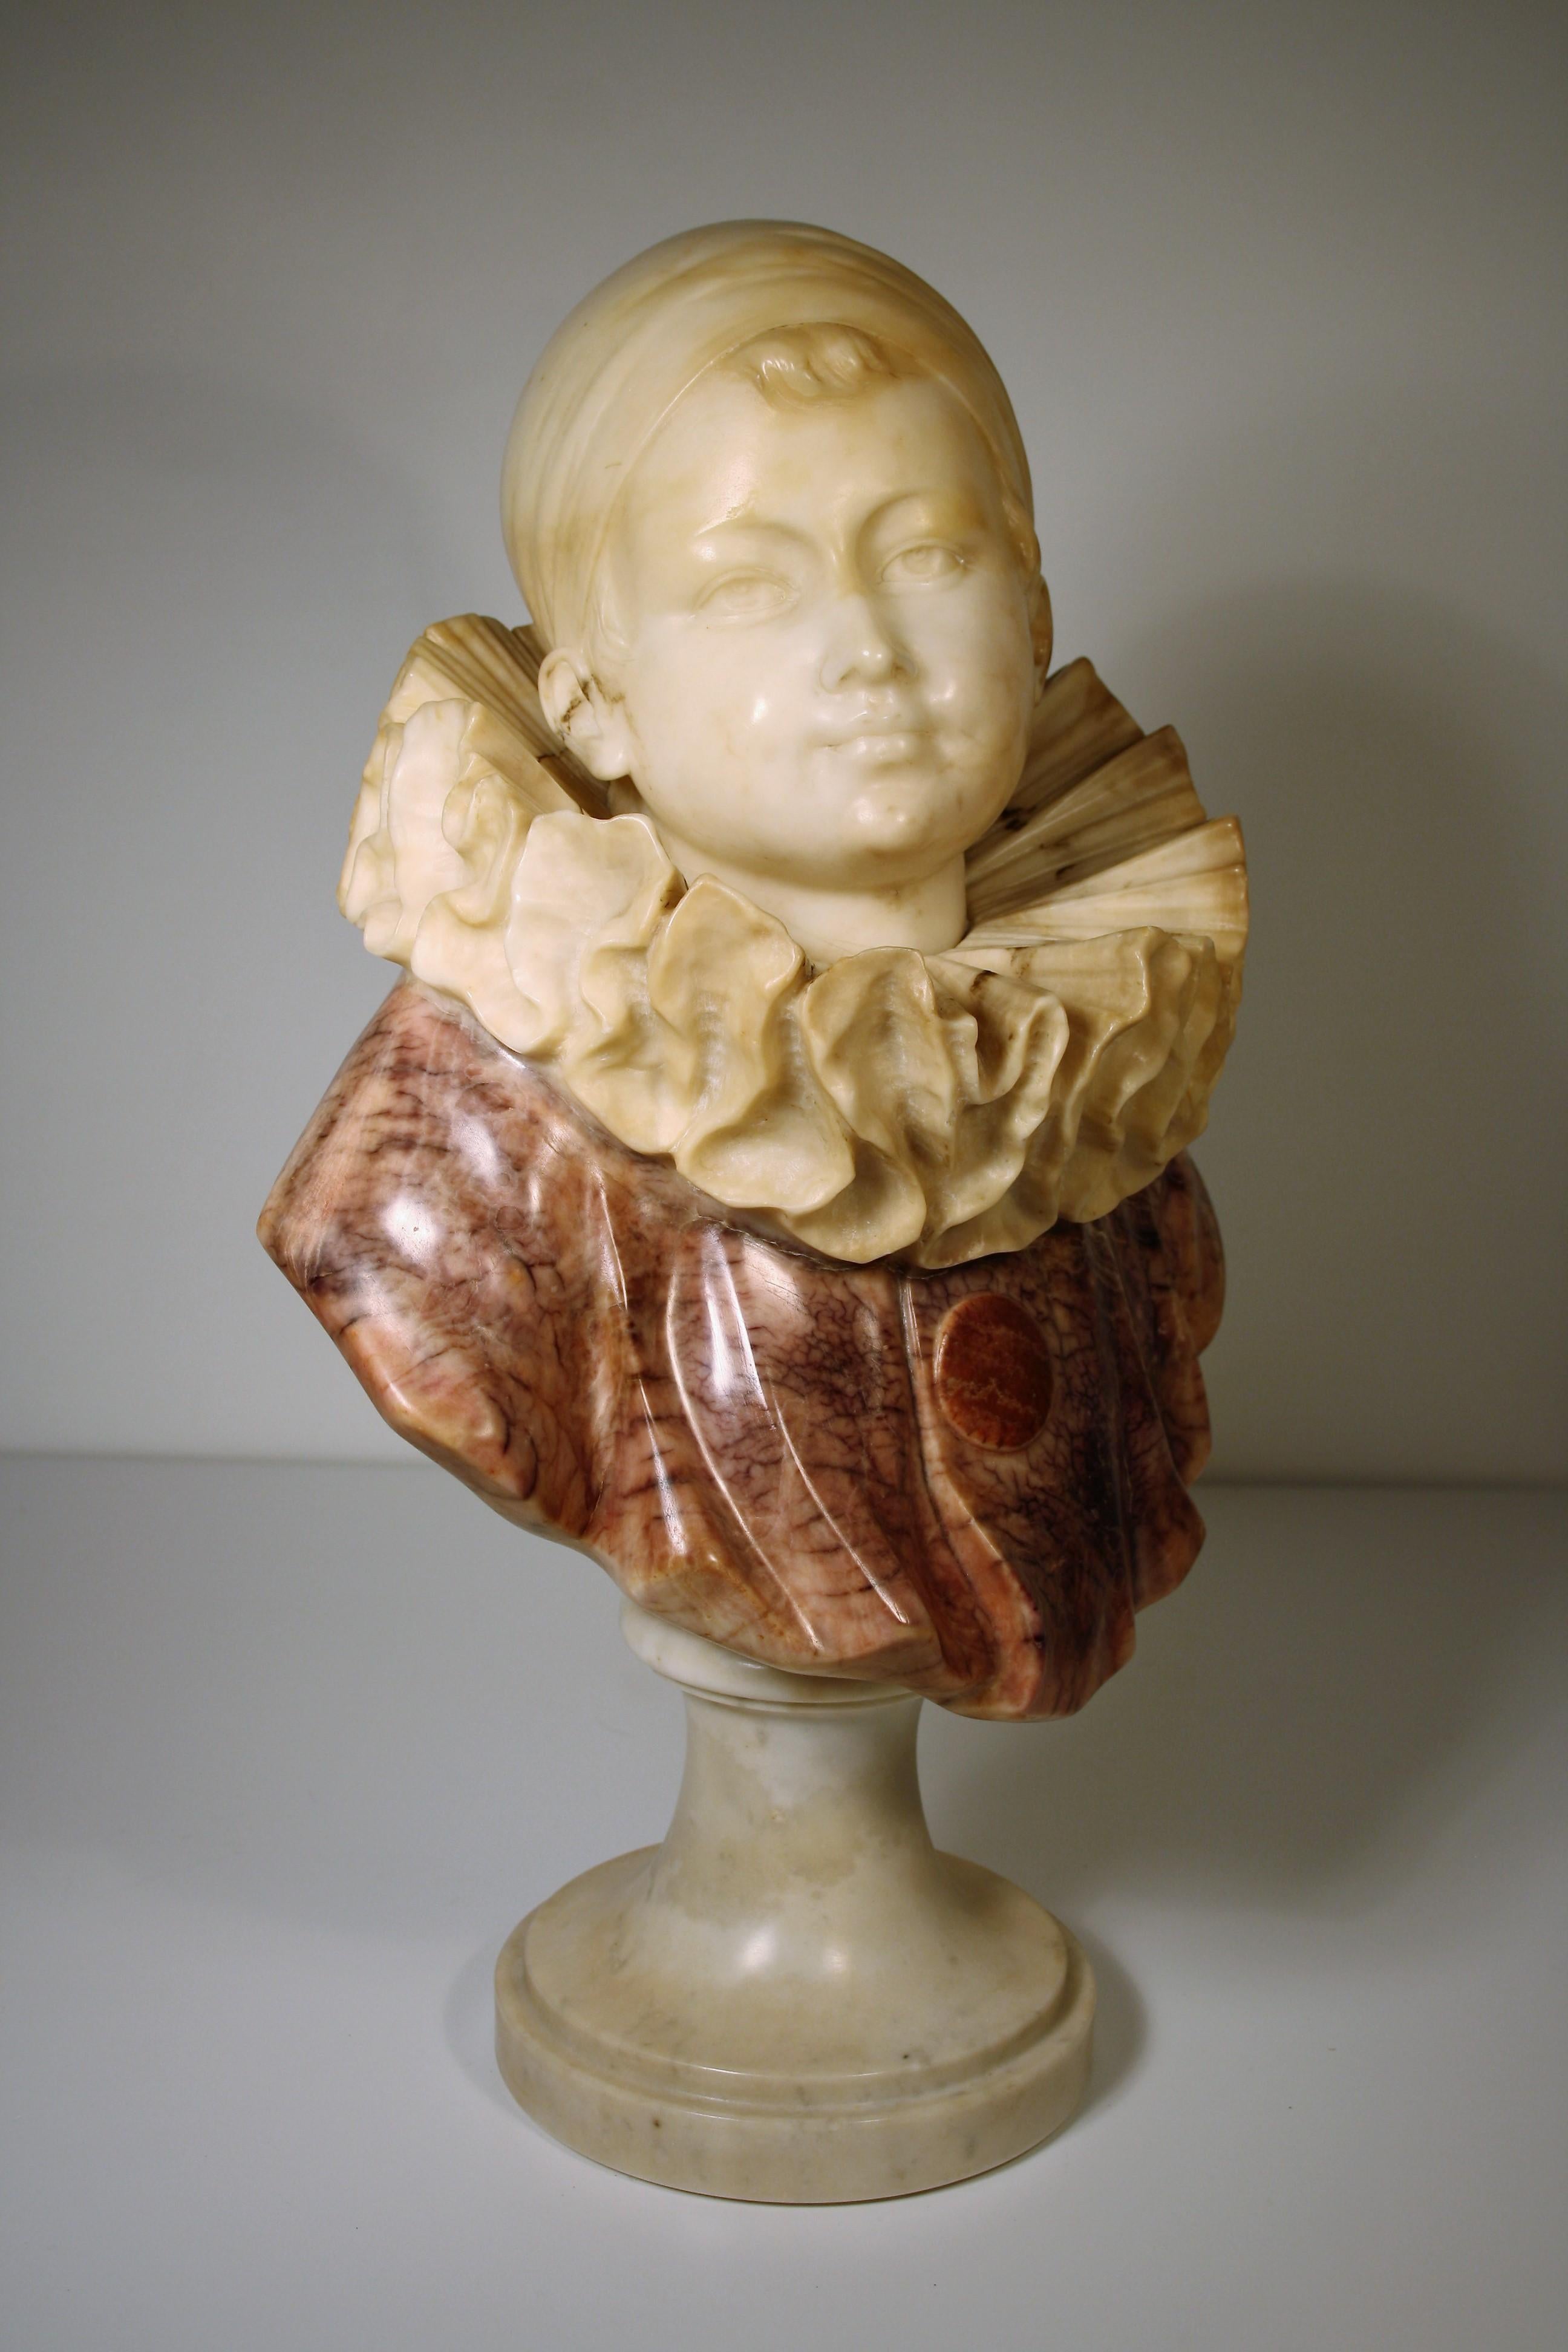 Very fine carved sculpture of a young Pierrot by Guglielmo Pugi (1850-1915), late 19th century in alabaster and white Carrara marble foot.
The sculpture is in very good condition and is signed on the back Pugi.